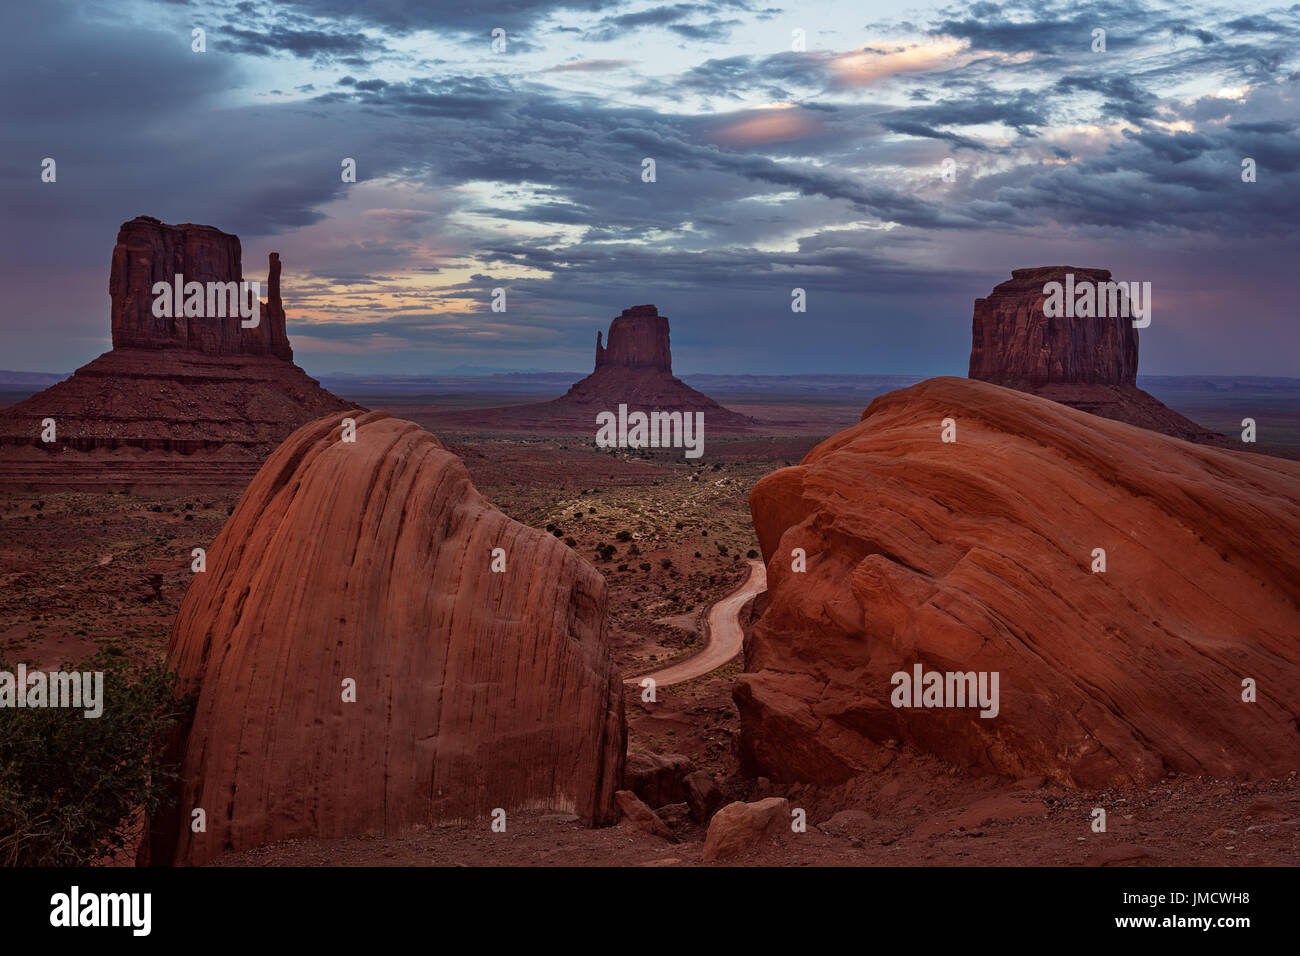 The Mittens and Merrick Butte at Sunset, Monument Valley Navajo Tribal Park, Arizona Stock Photo